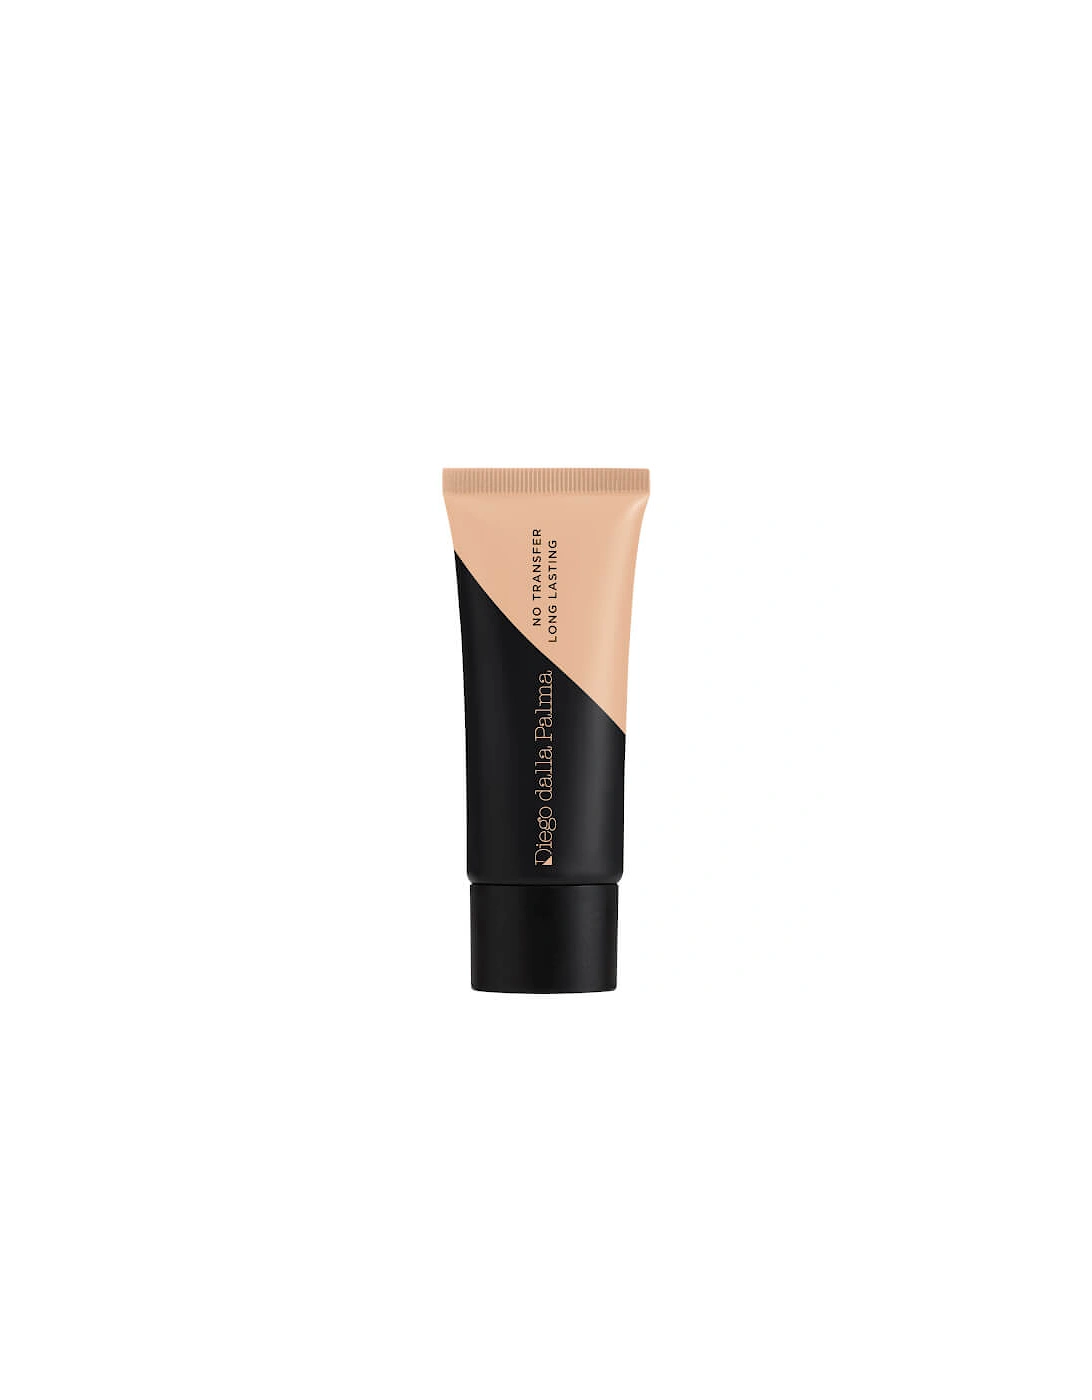 Stay on Me No Transfer Long Lasting Water Resistant Foundation - Deep Beige - Diego Dalla Palma, 2 of 1